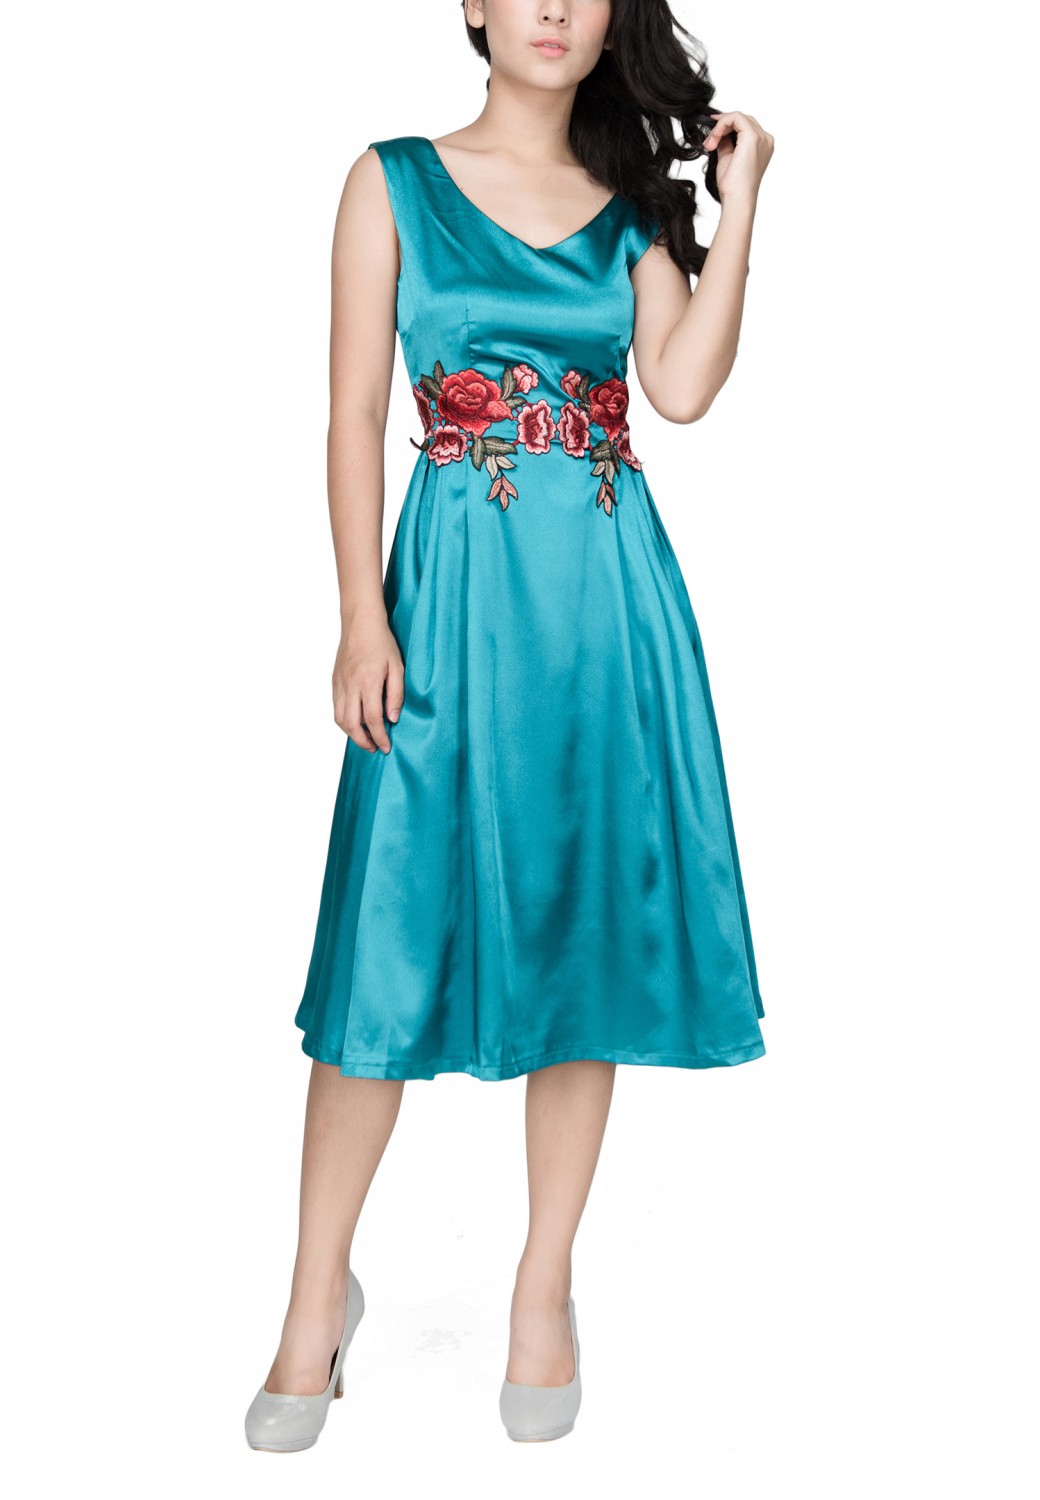 TA1018-TURQUOISE-S ONLY